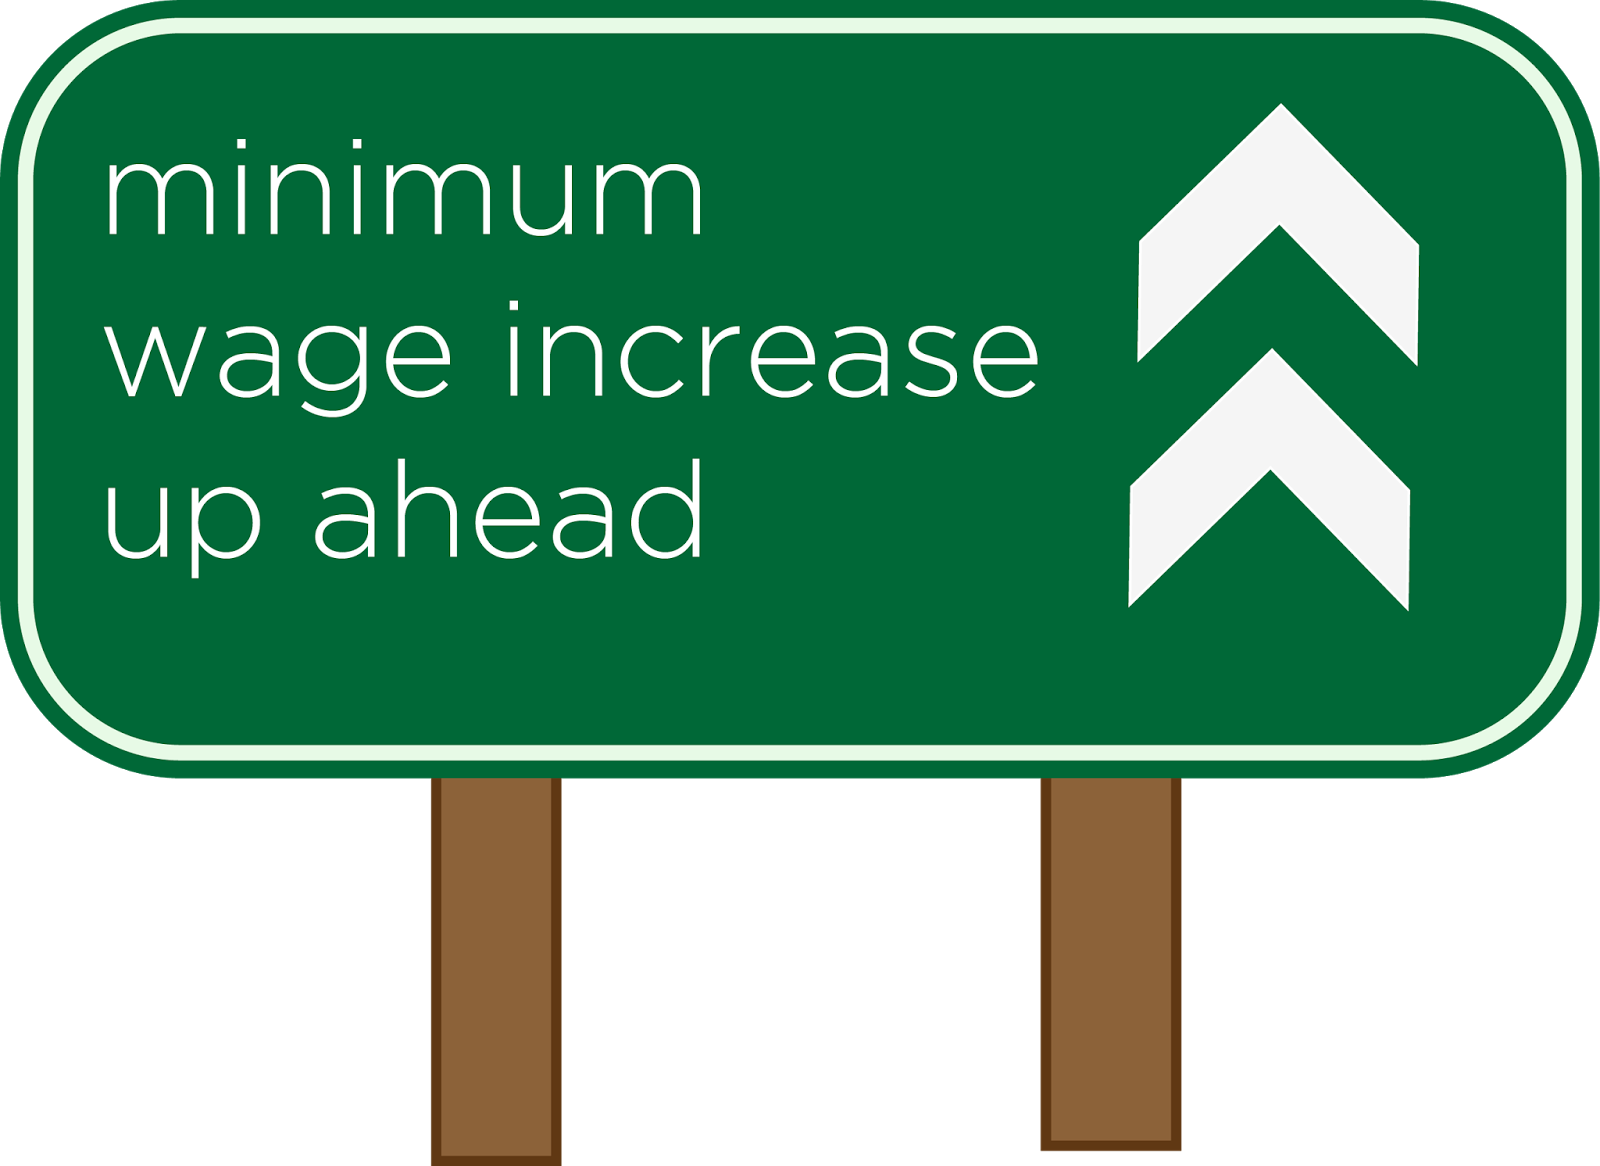 July 2019 Award wage rates available for download